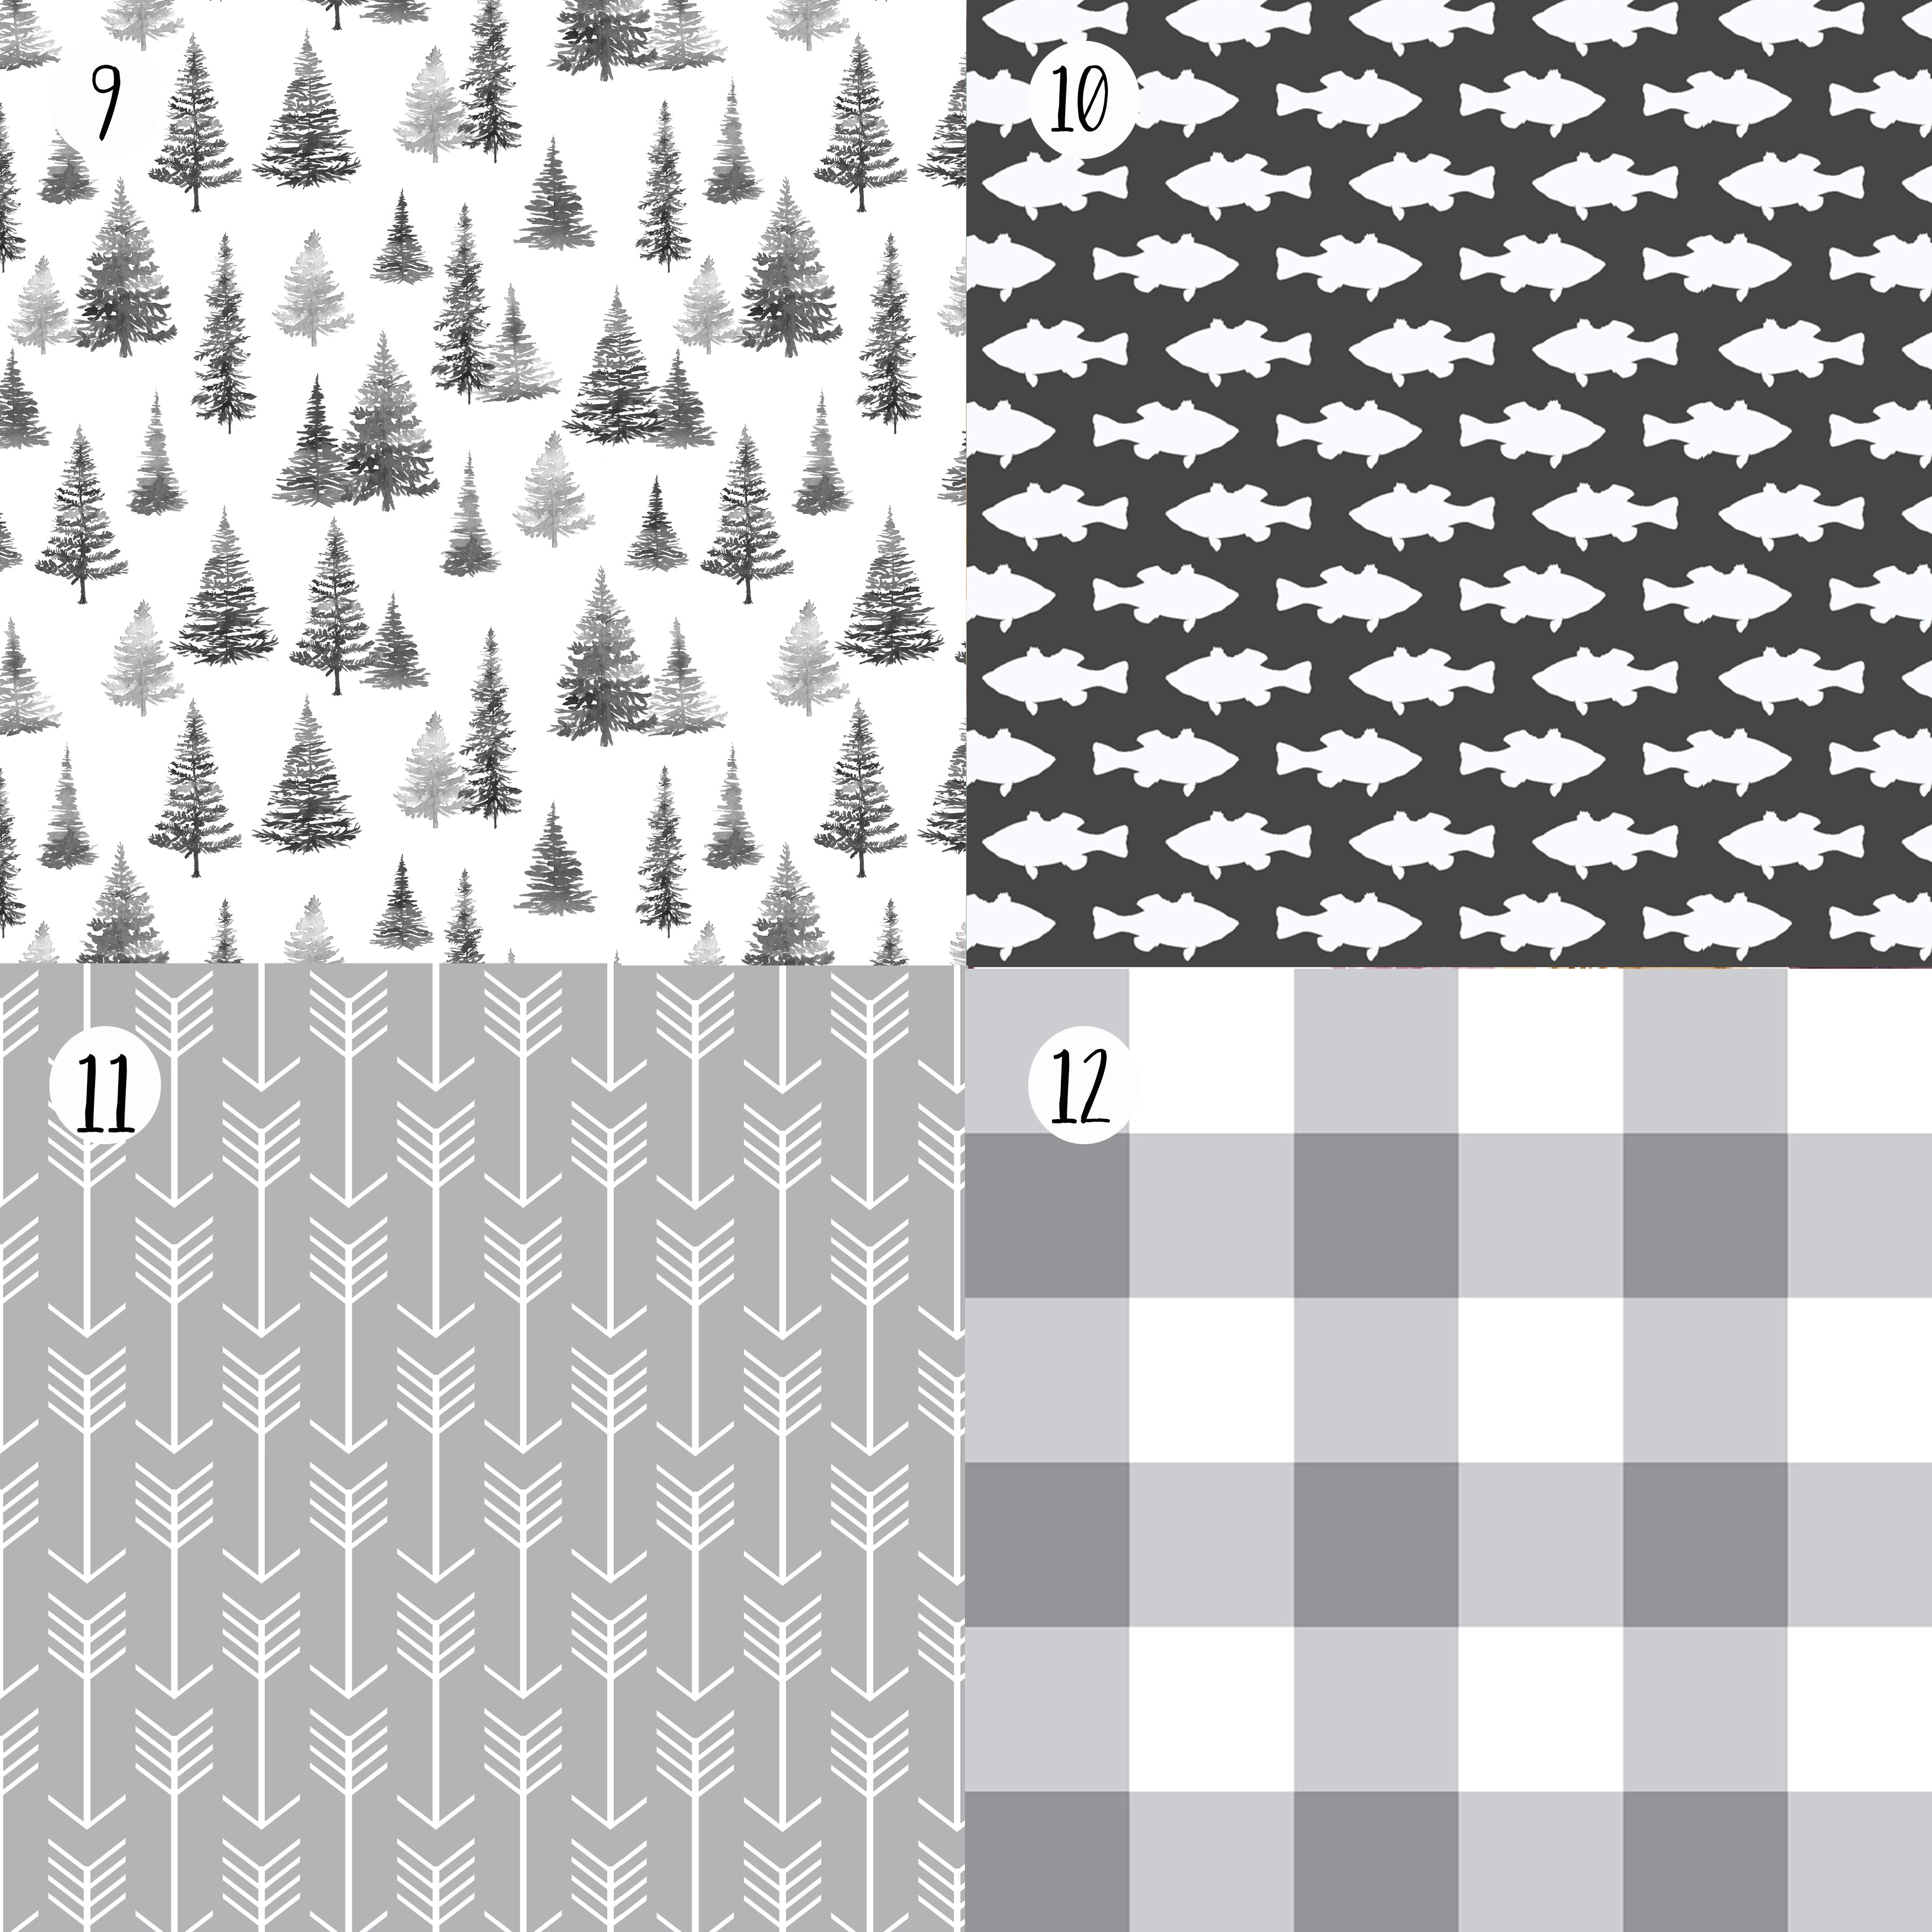 Gray Woodlands Fabric Options for Crib Bedding